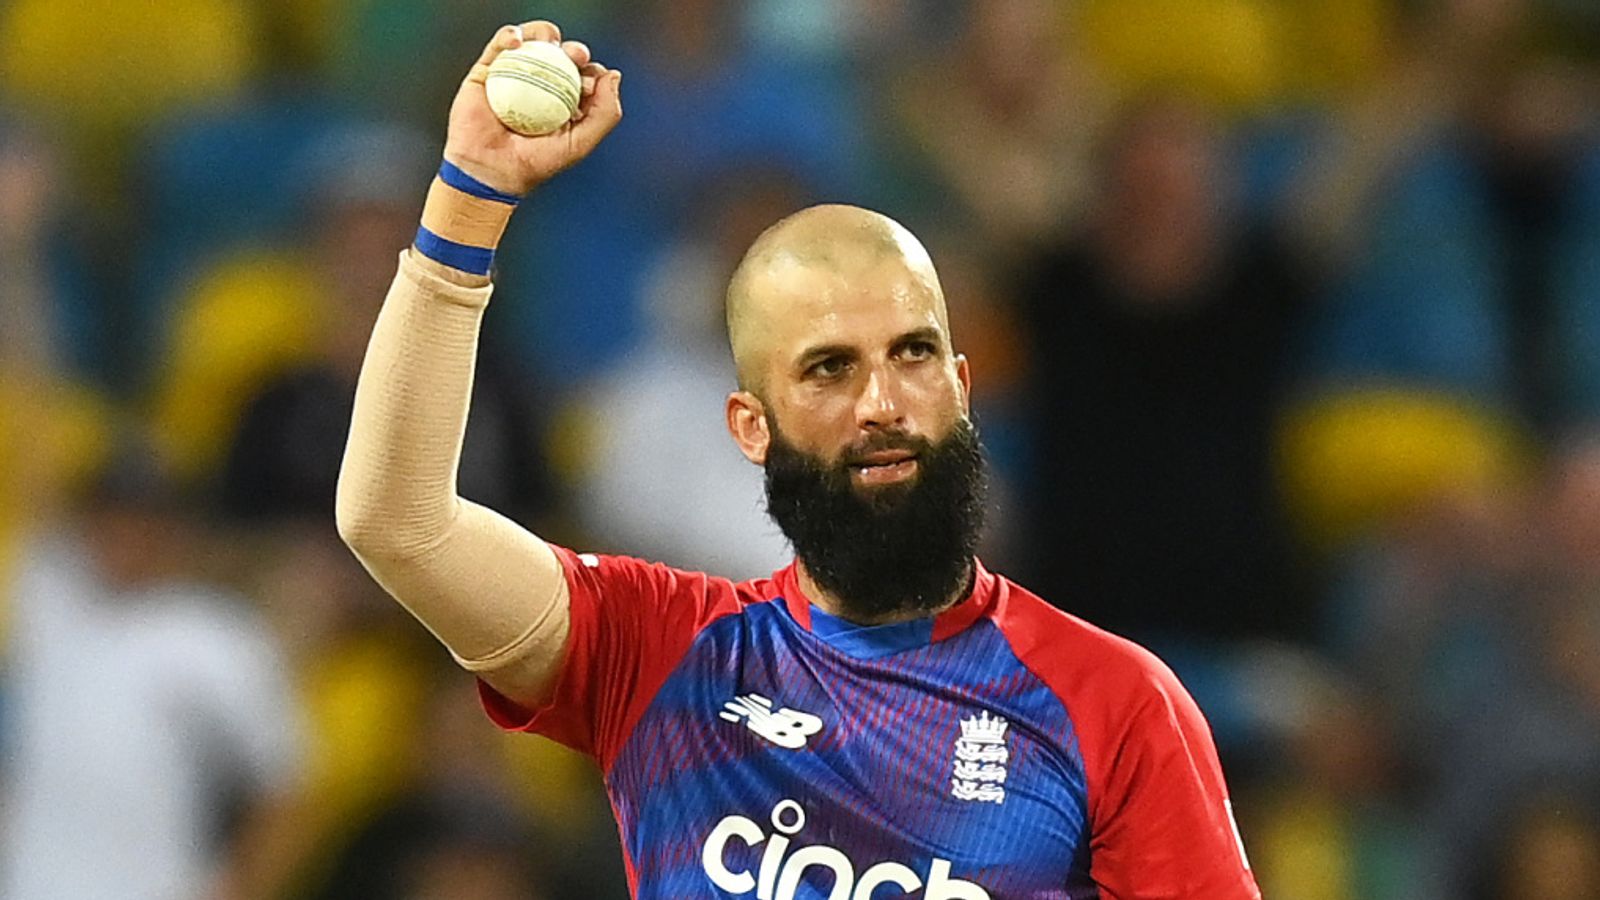 Moeen Ali stars as England cling on to level T20 series with one-run win over West Indies - Sky Sports